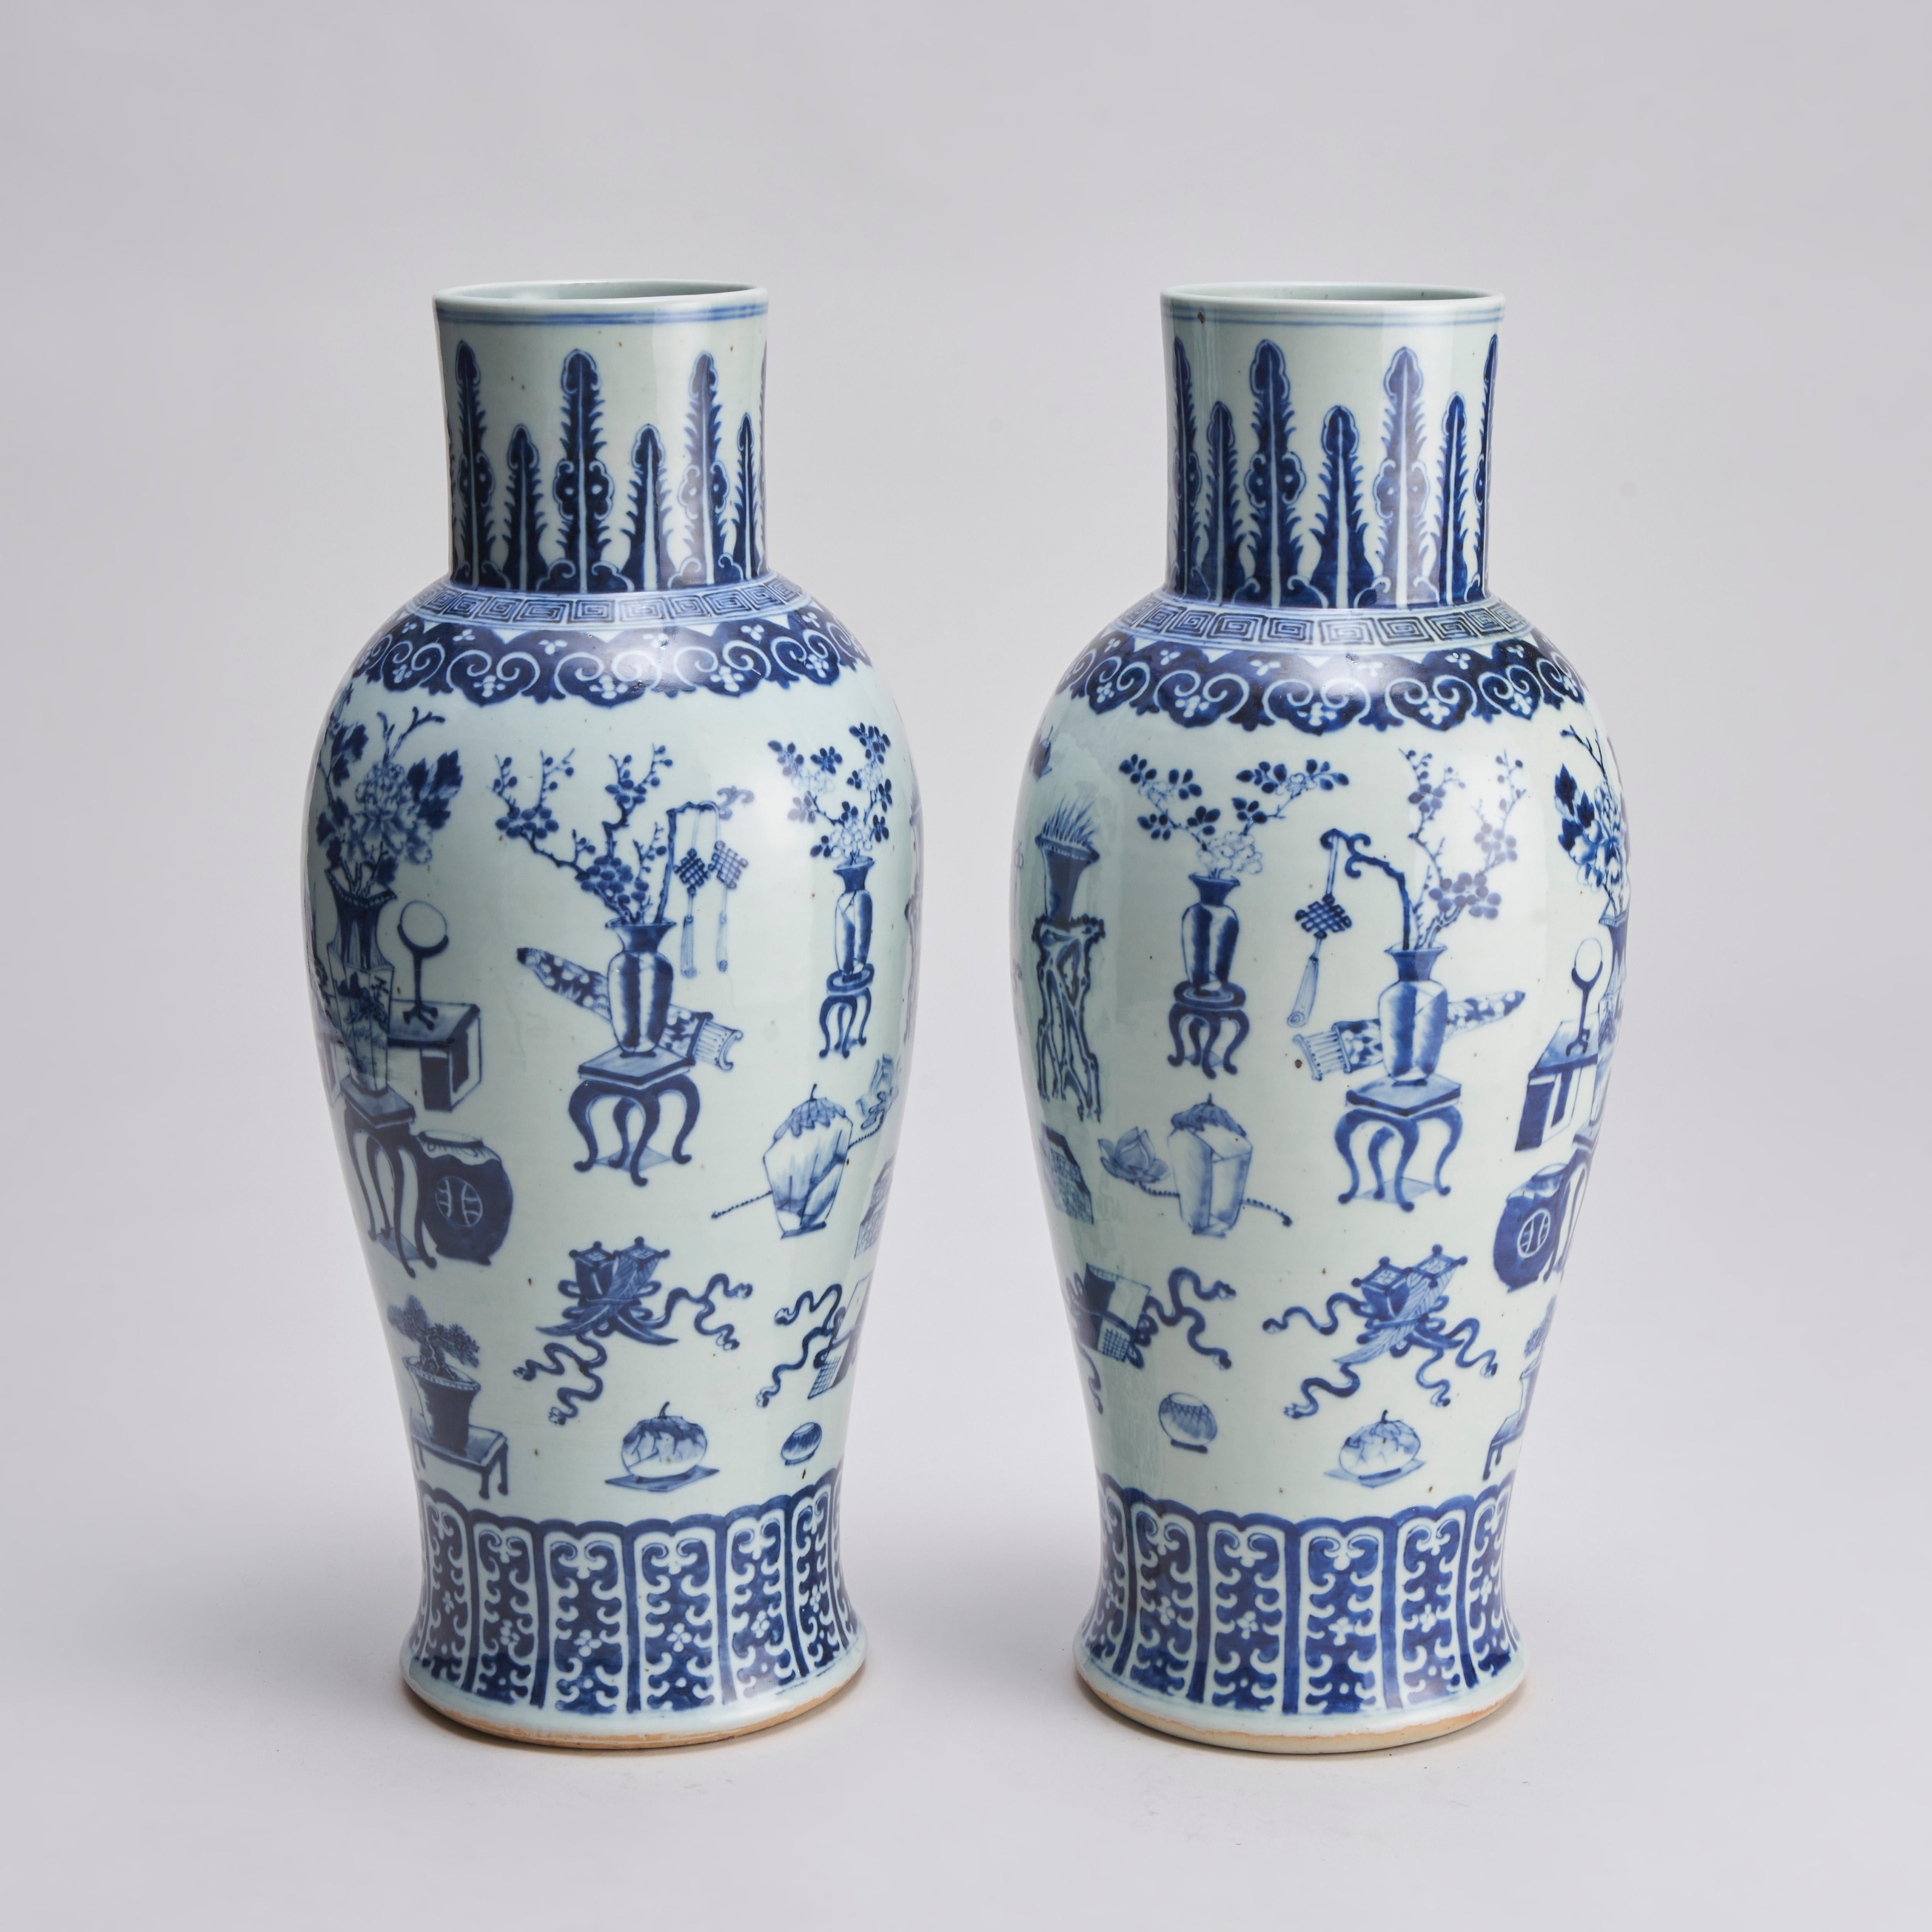 From our collection of antique Chinese porcelain, a pair of 19th century Chinese blue and white vases with fine decoration of floral displays and precious scholarly objects such as scrolls, vases, floral displays and writing implements and a Penzai